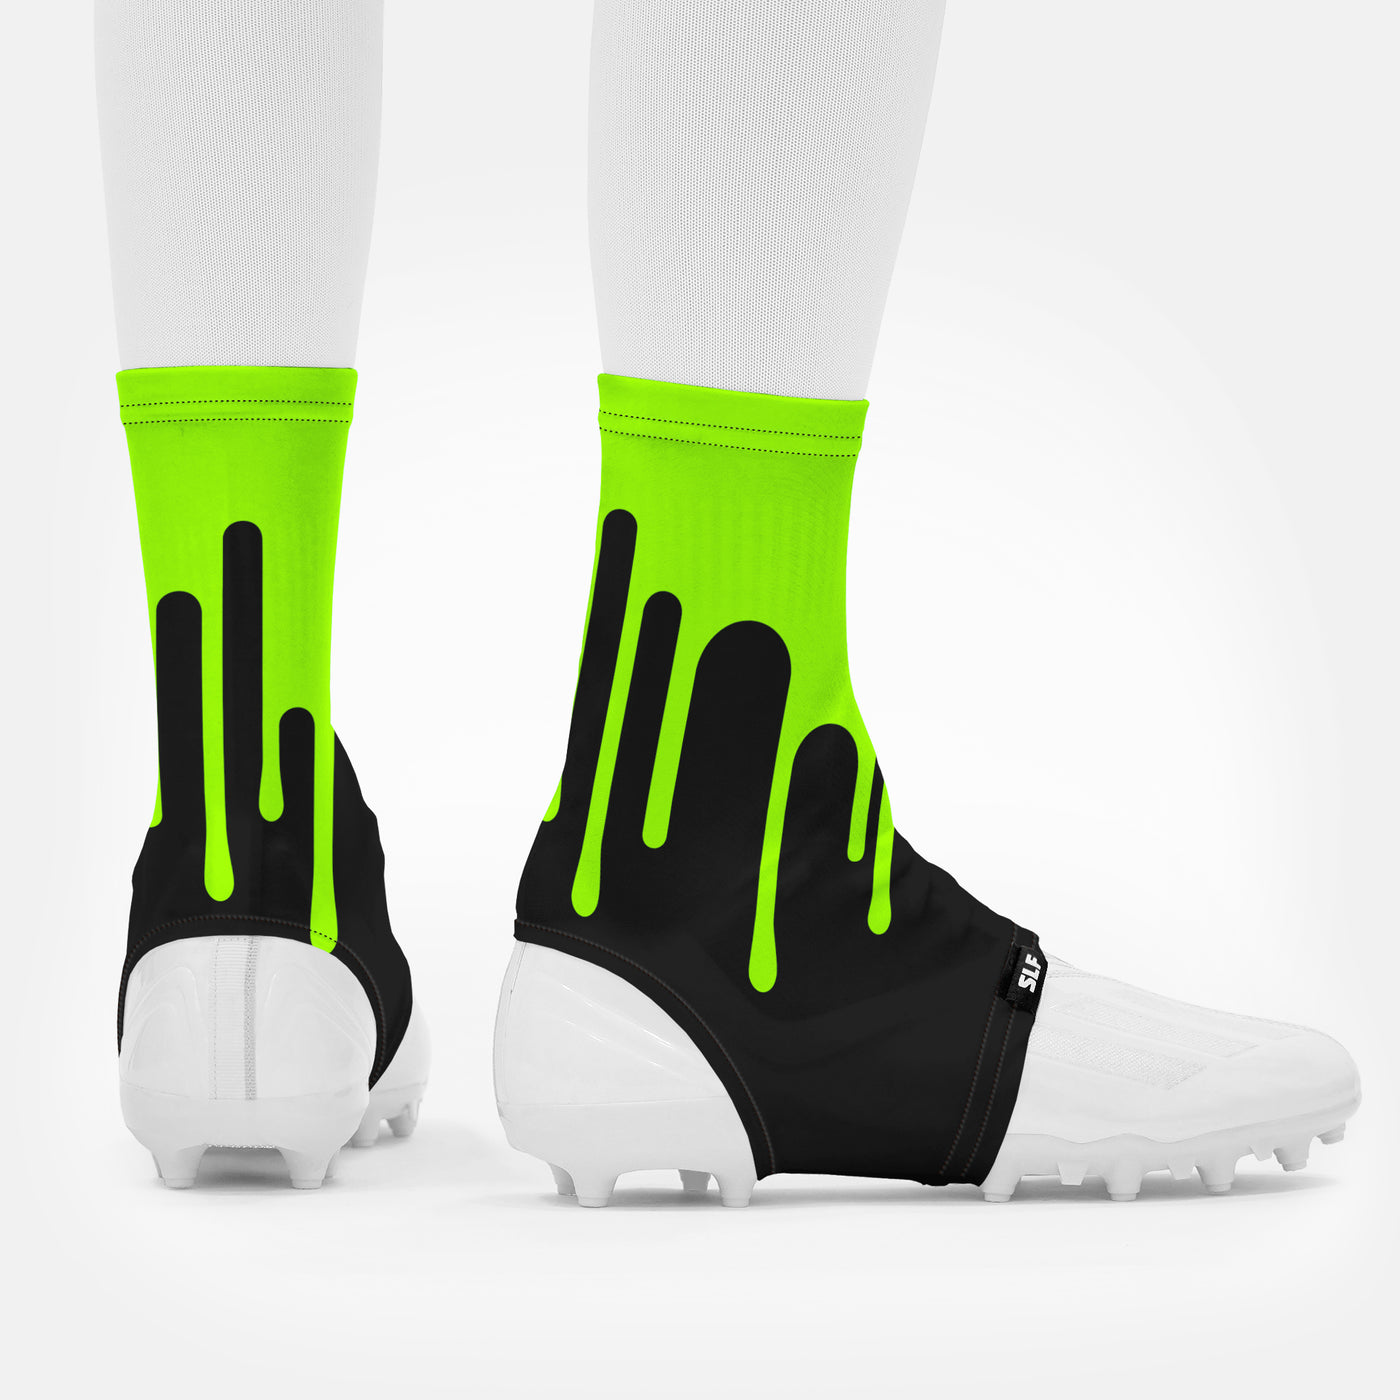 Slime Black Green Spats / Cleat Covers